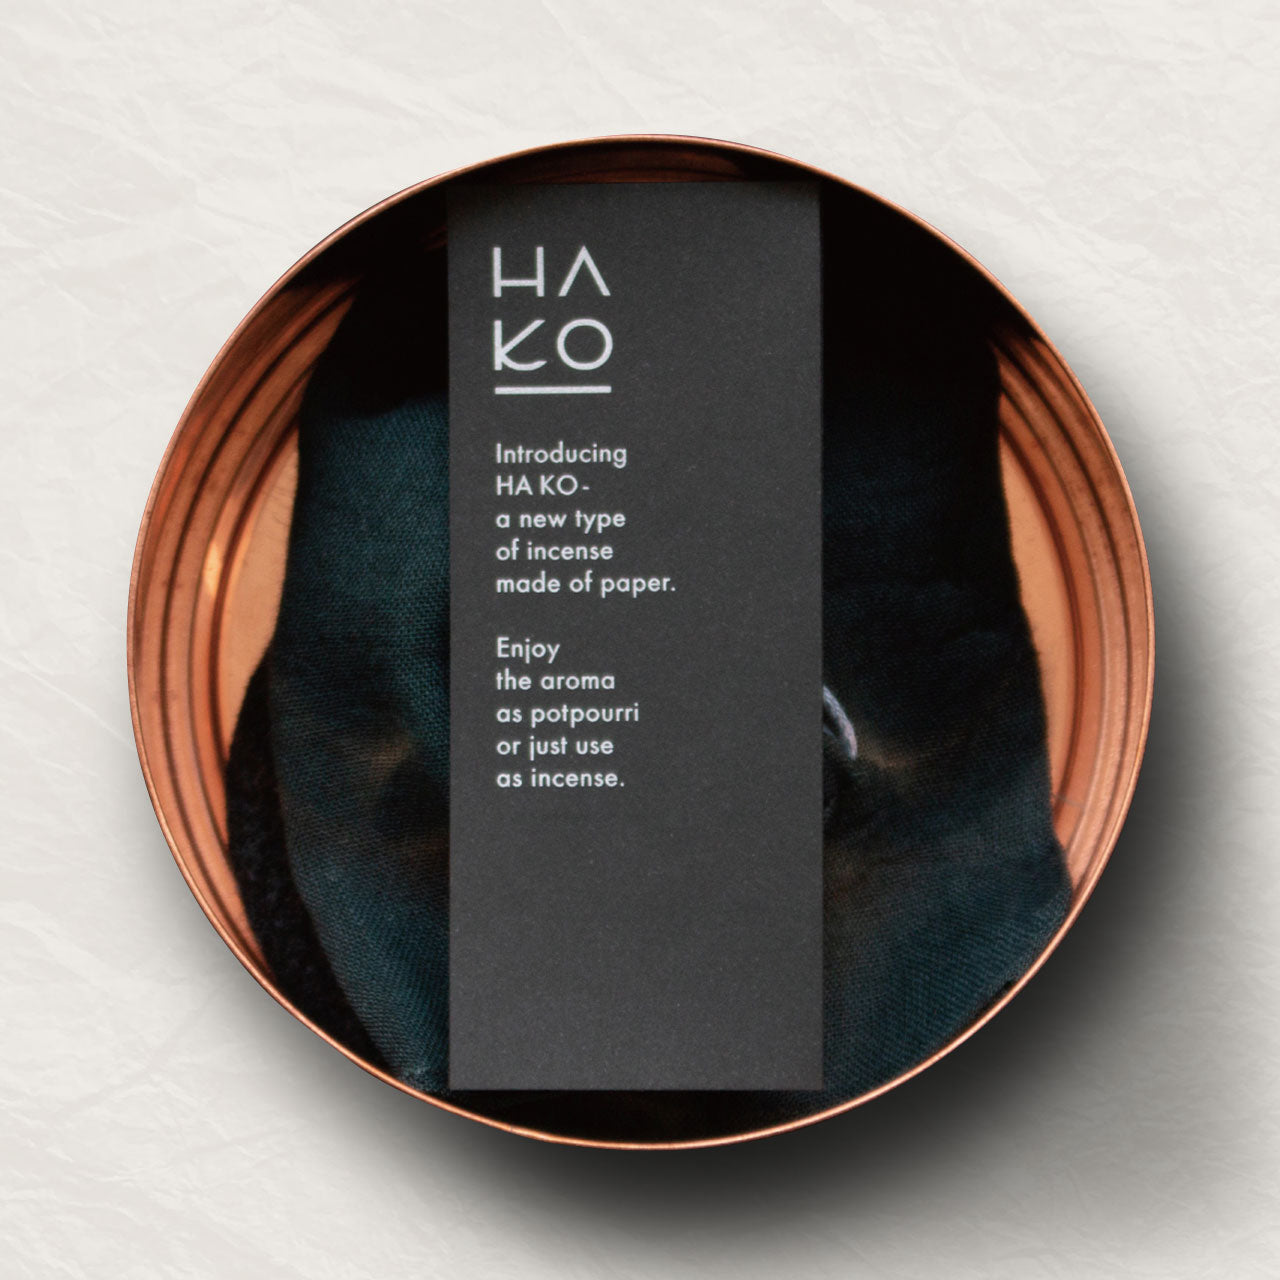 A copper container with a black card describing the incense inside